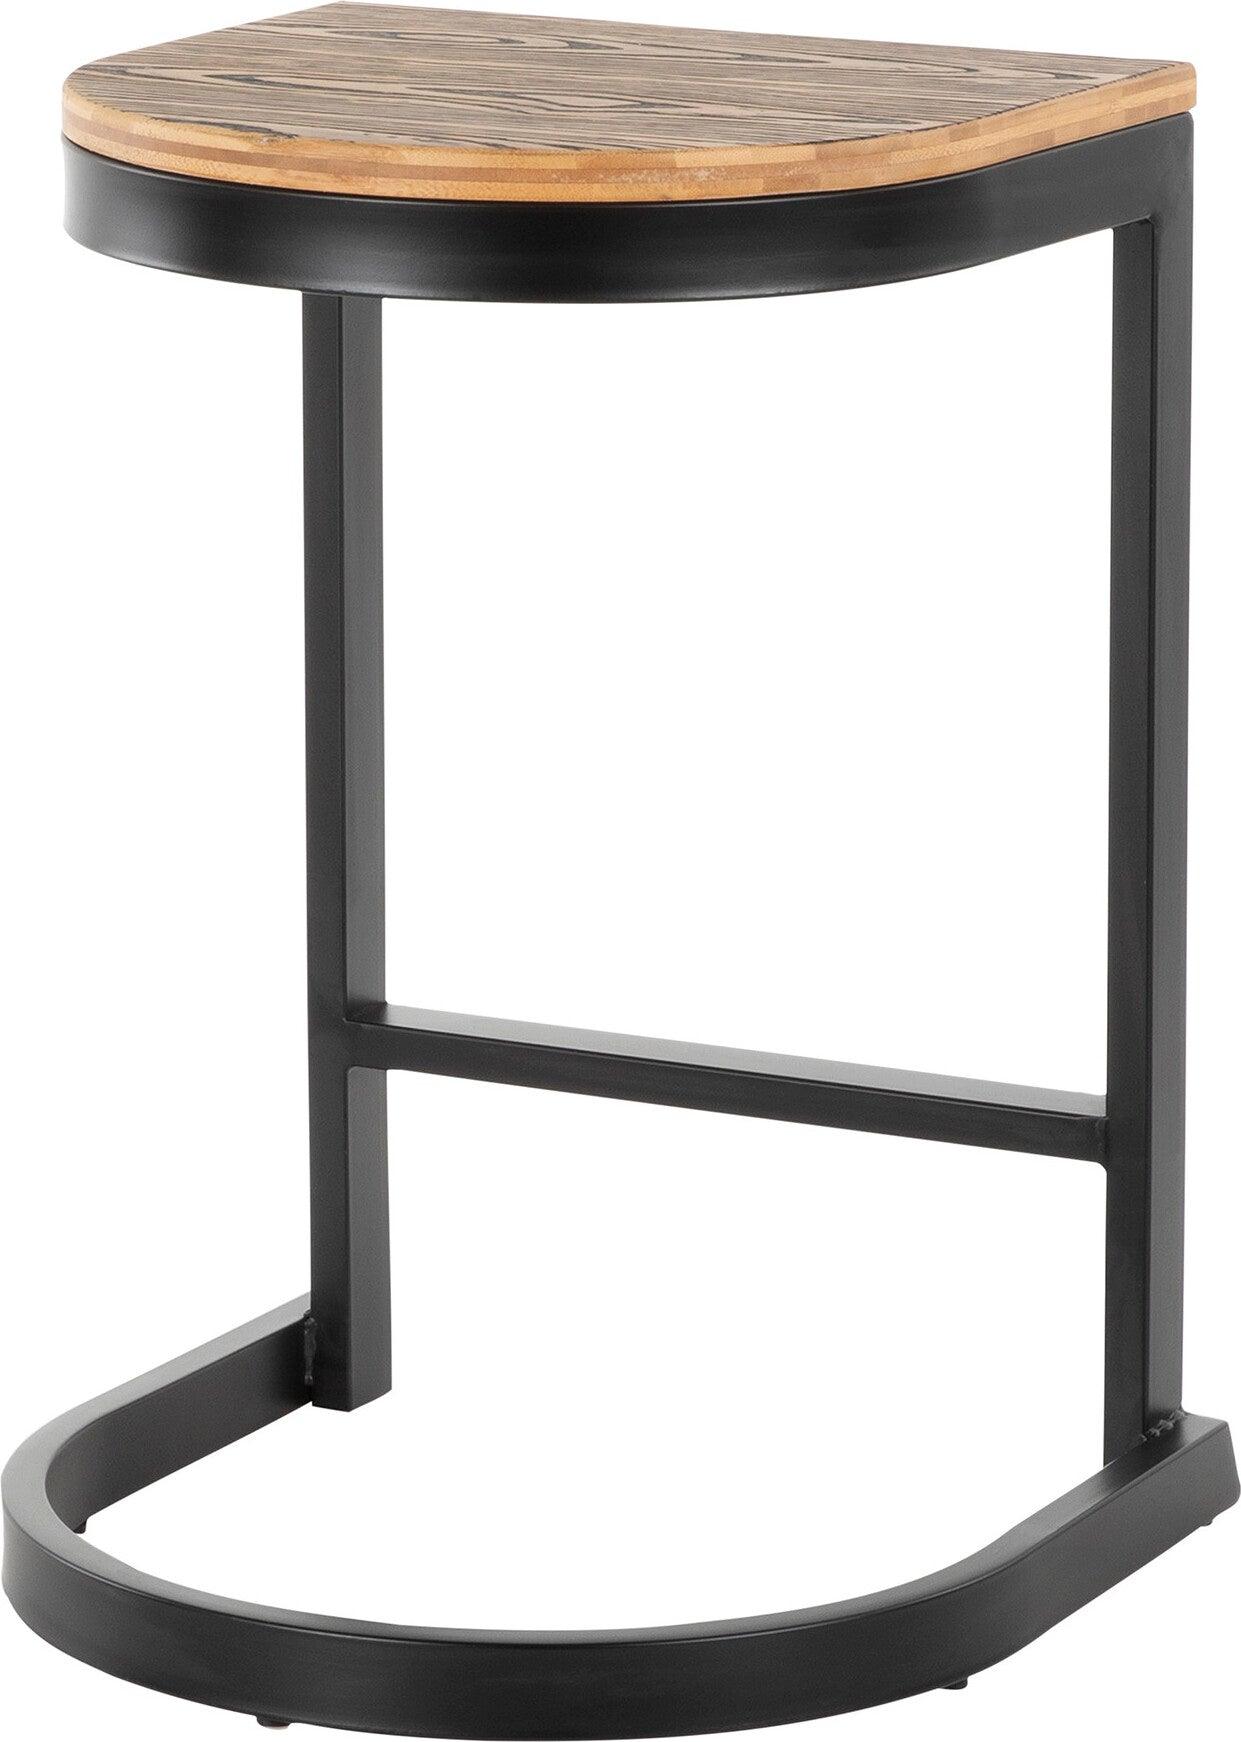 Lumisource Barstools - Industrial Demi Counter Stool (Set of 2) Black & Bamboo